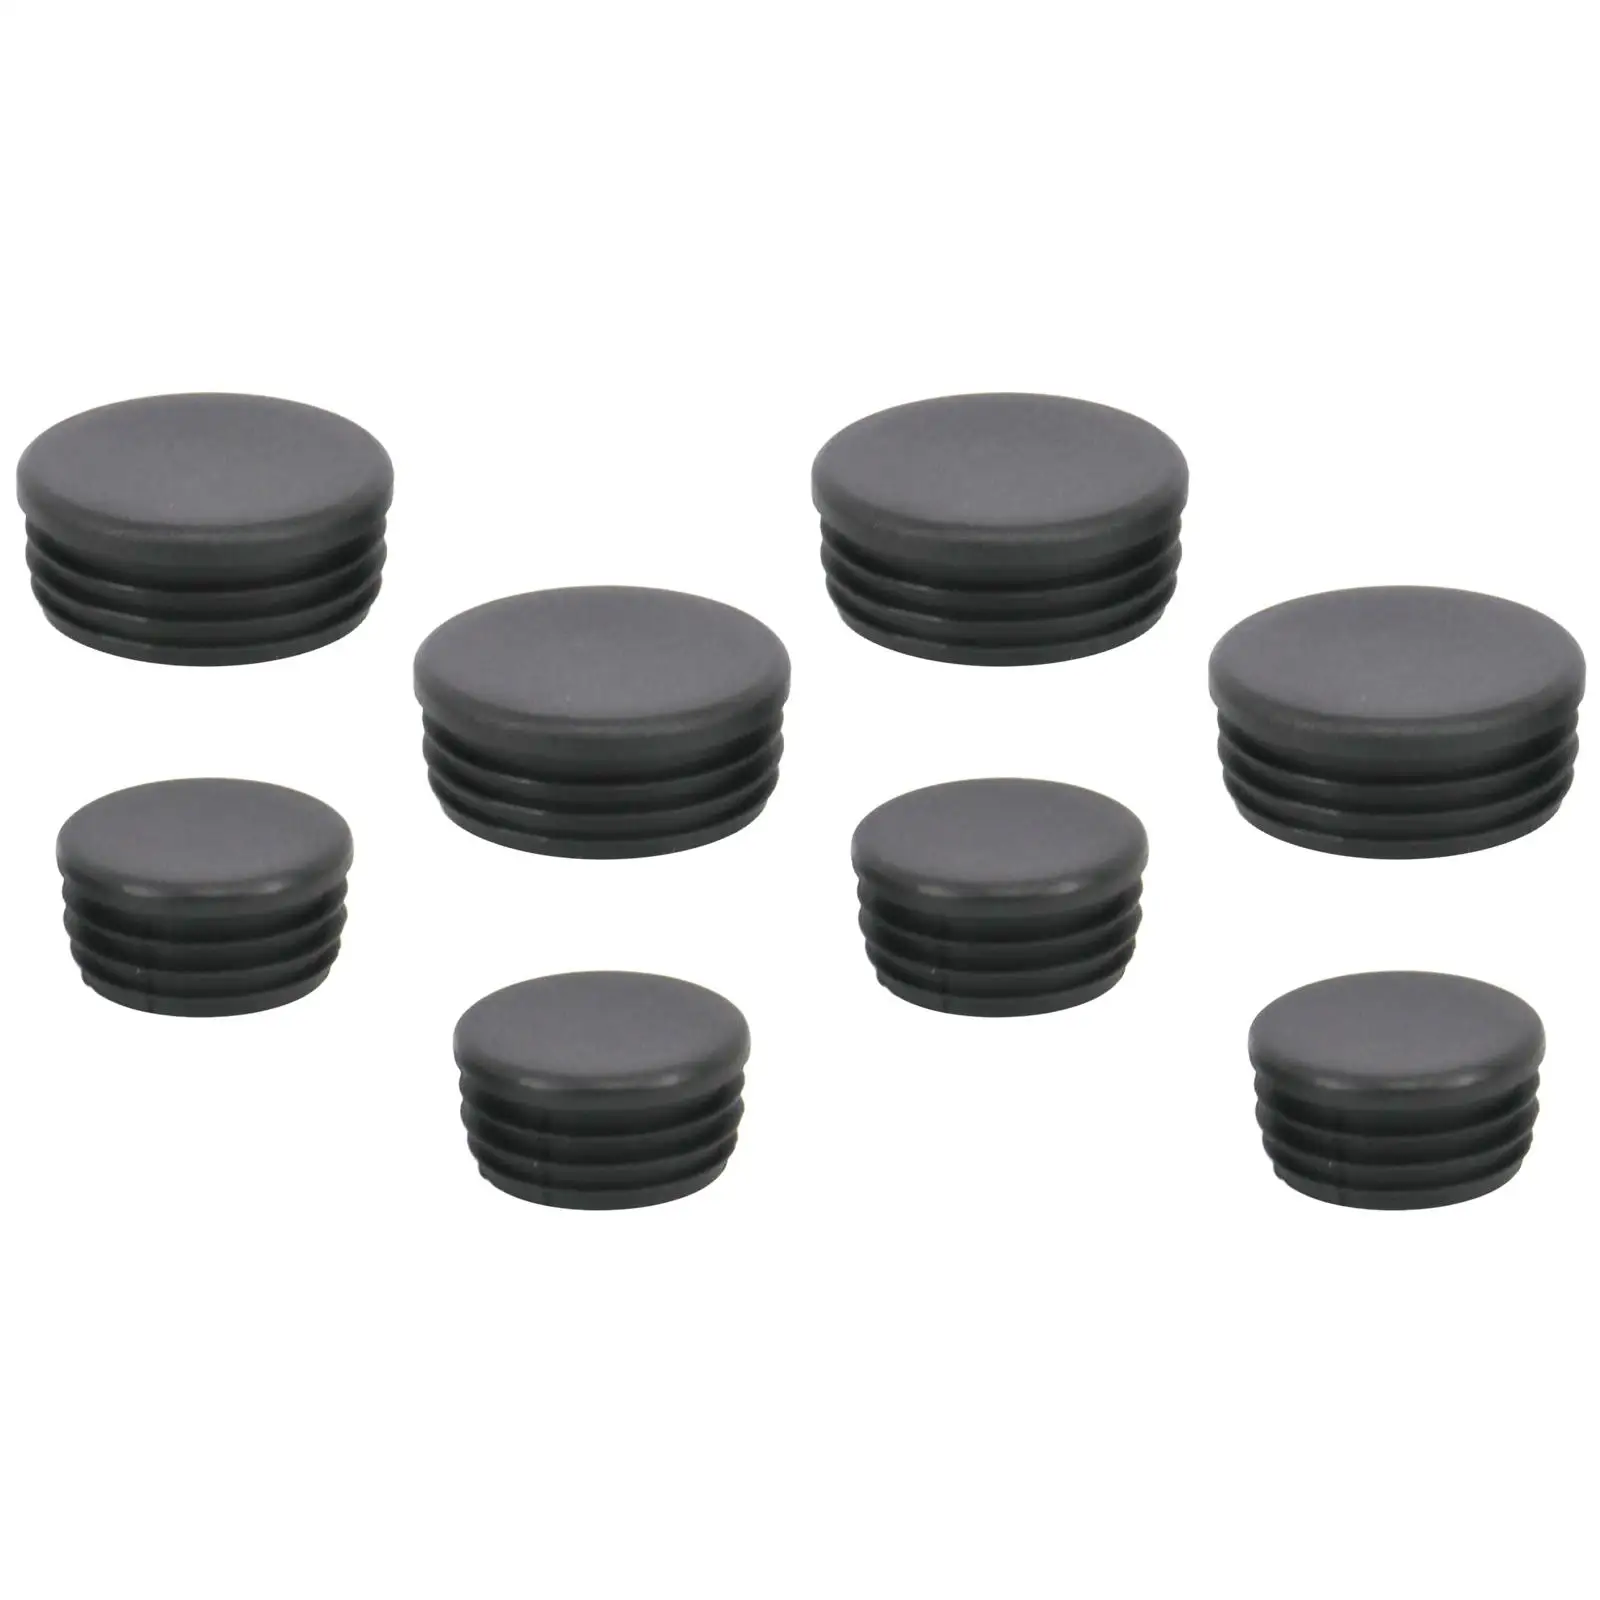 8Pcs Chassis Plug Covers Exterior Fit for Jb64 Jb74